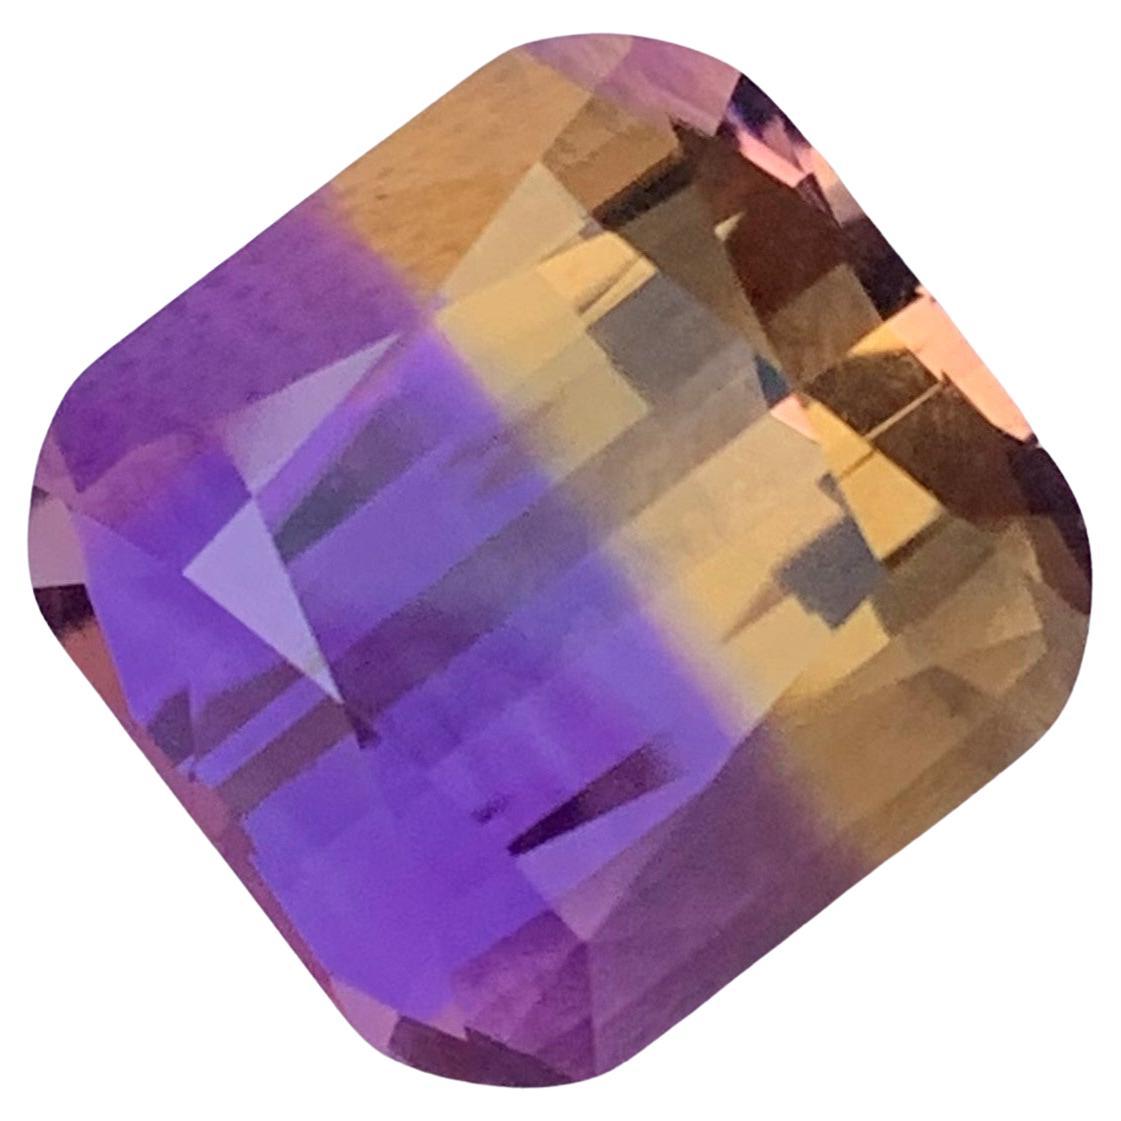 Gorgeous 14.25 Carat Loose Ametrine from Bolivia For Sale